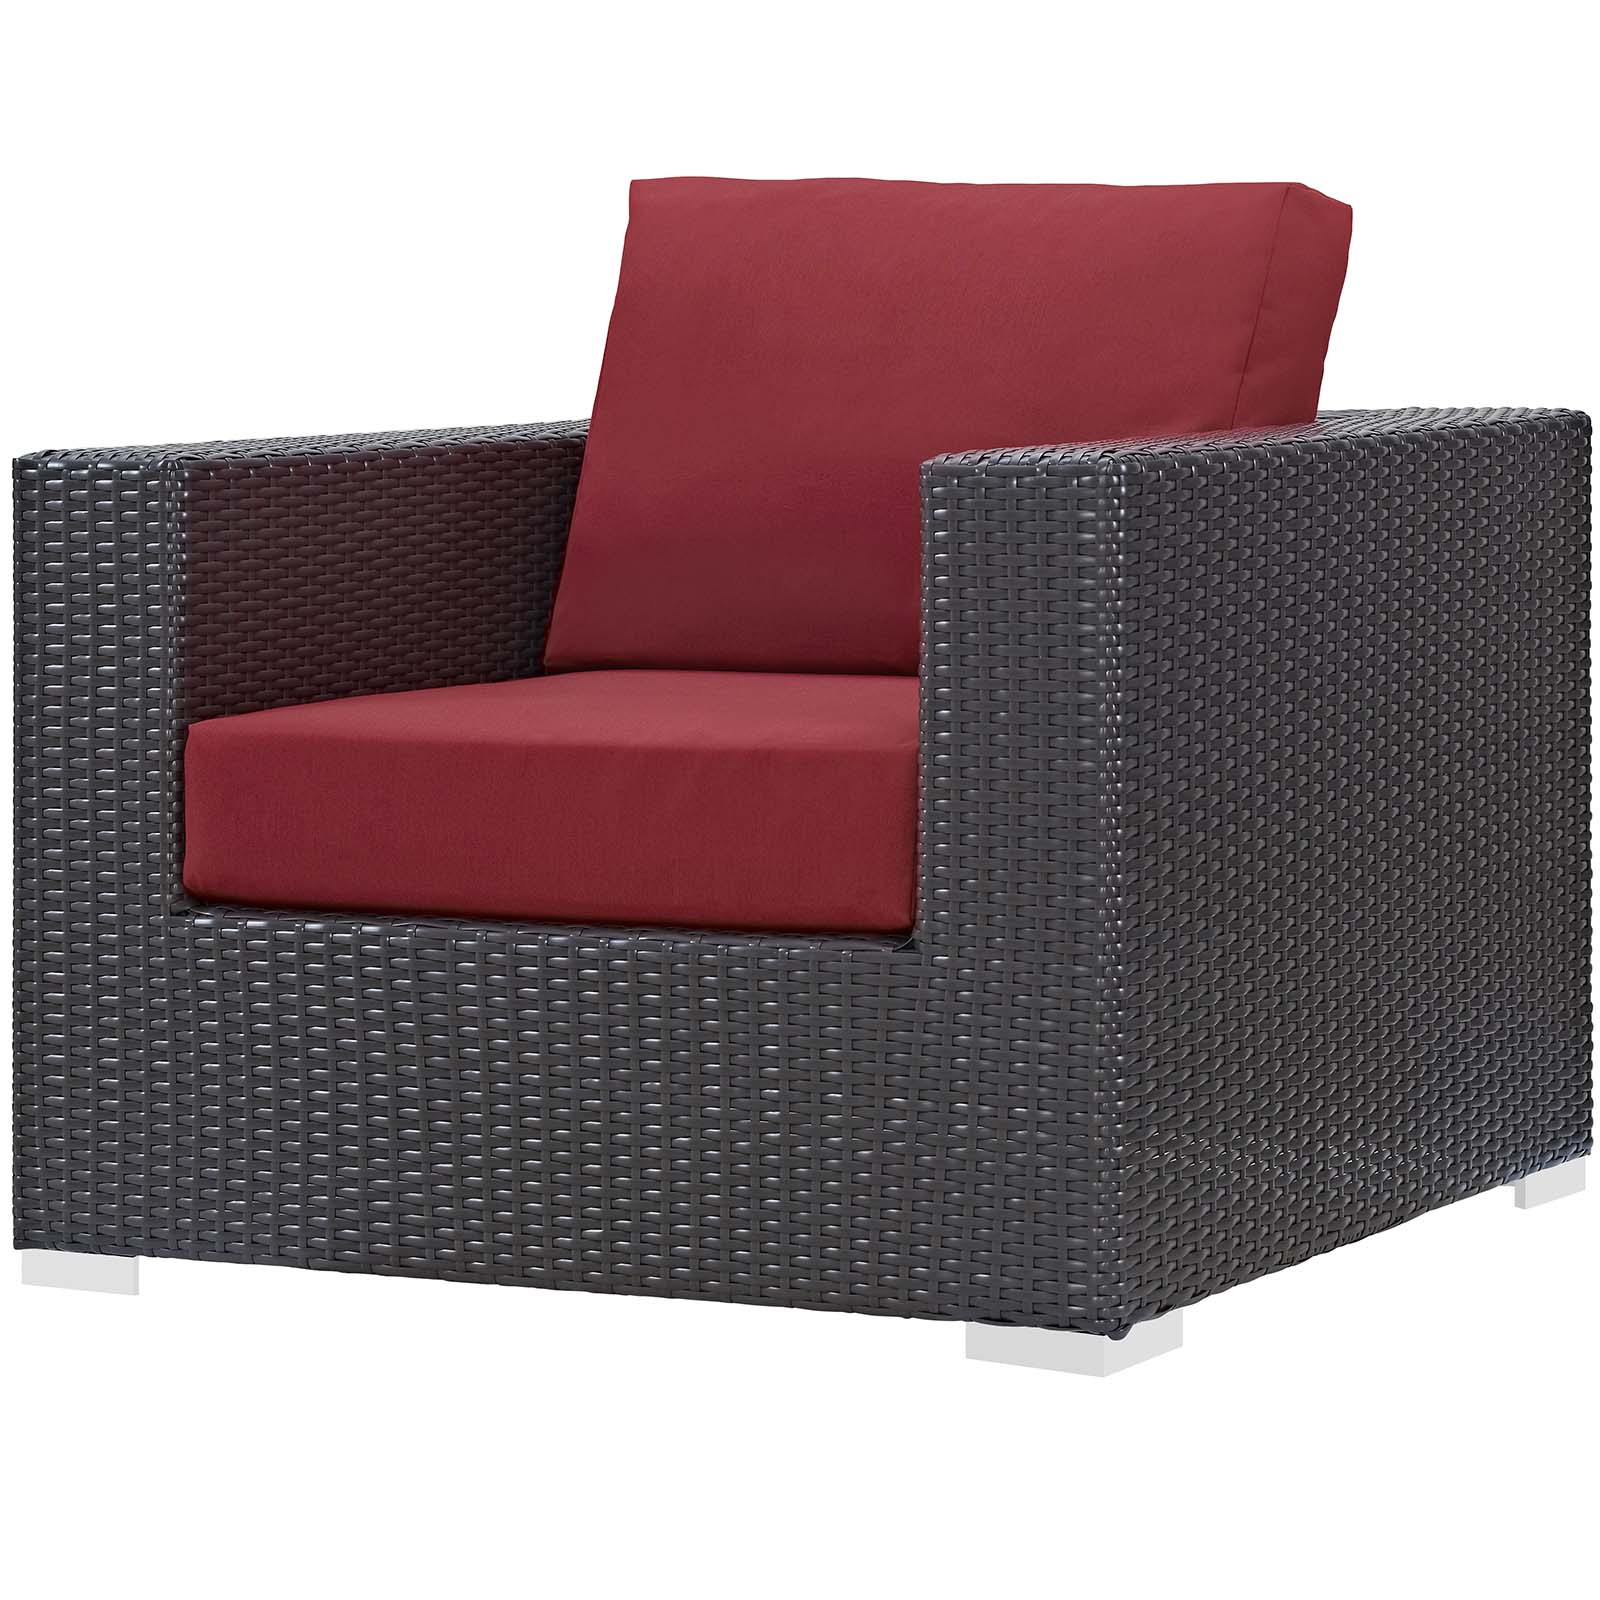 Contemporary Modern Urban Designer Outdoor Patio Balcony Garden Furniture Lounge Sofa, Chair and Coffee Table Fire Pit Set, Fabric Rattan Wicker, Red - image 4 of 9